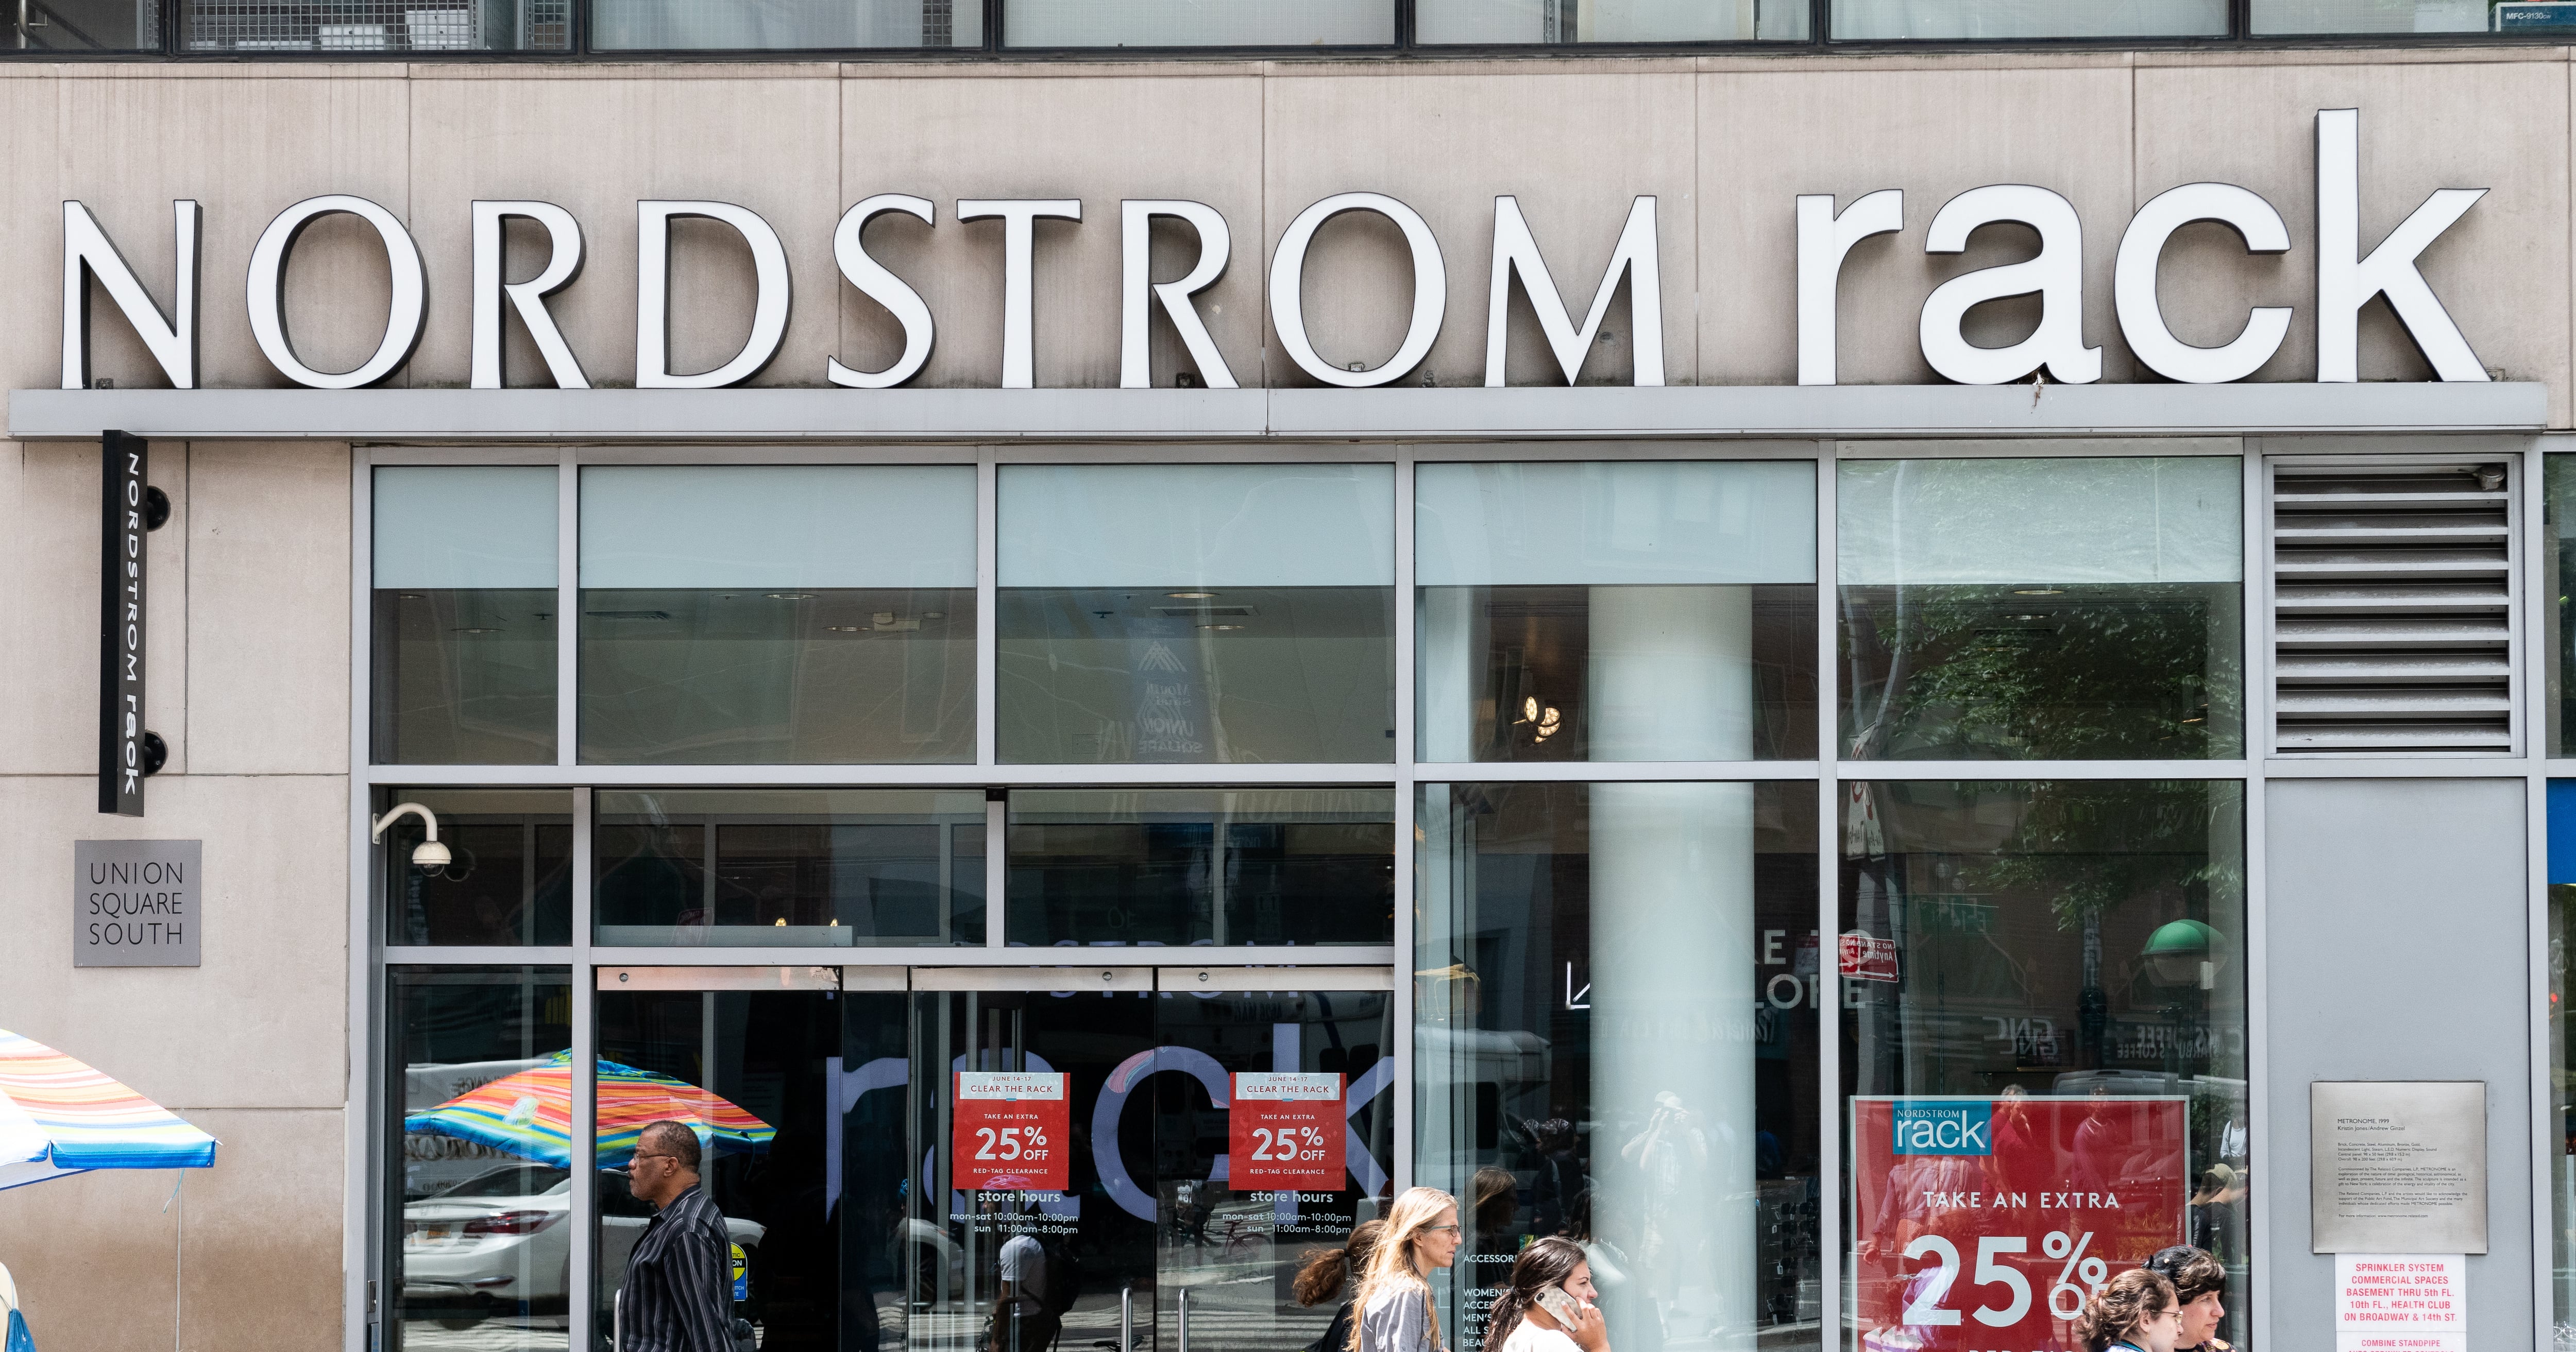 A general view of the atmosphere as Nordstrom Rack opens a new store  News Photo - Getty Images